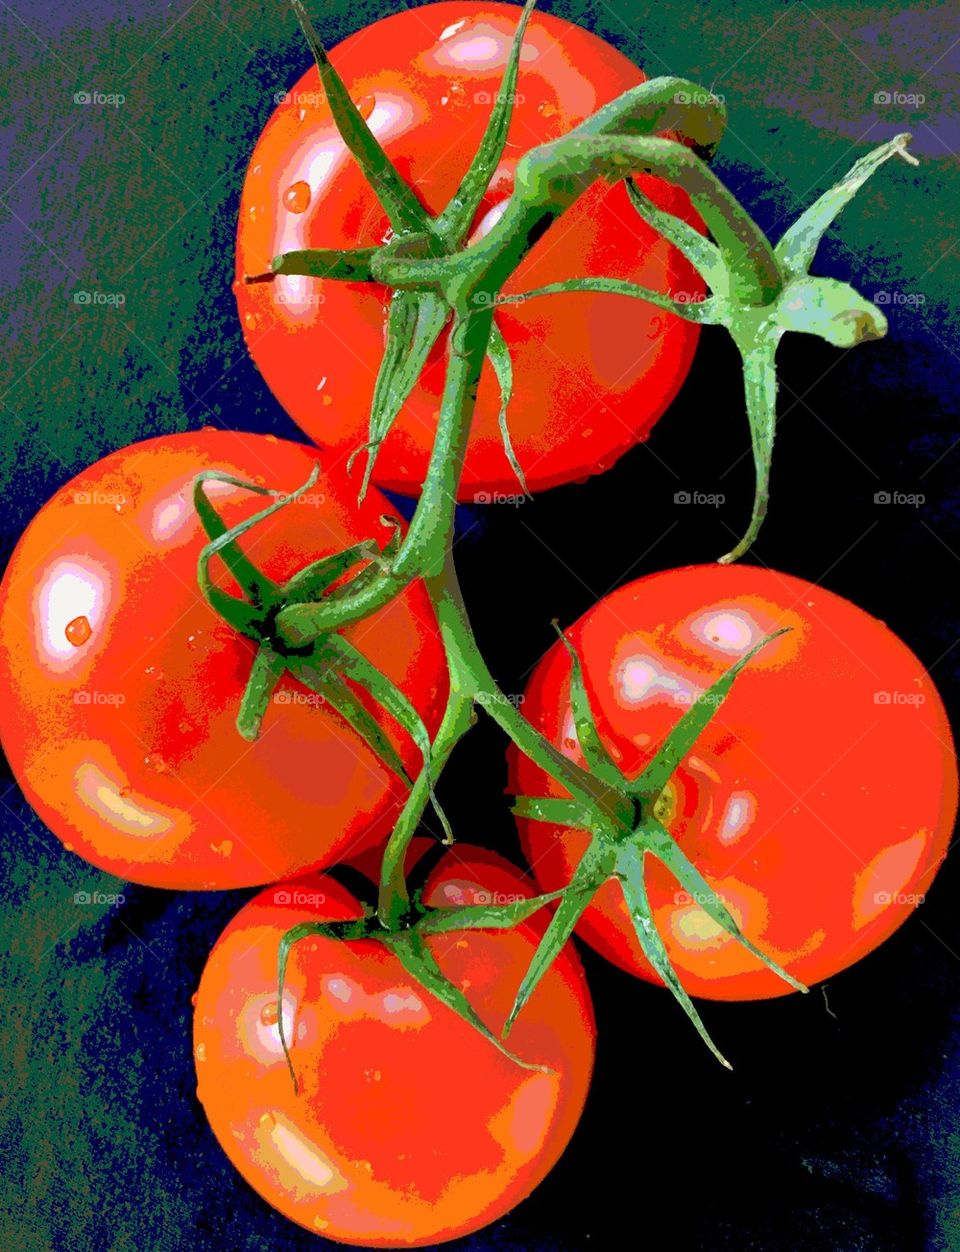 Some Tomatoes 